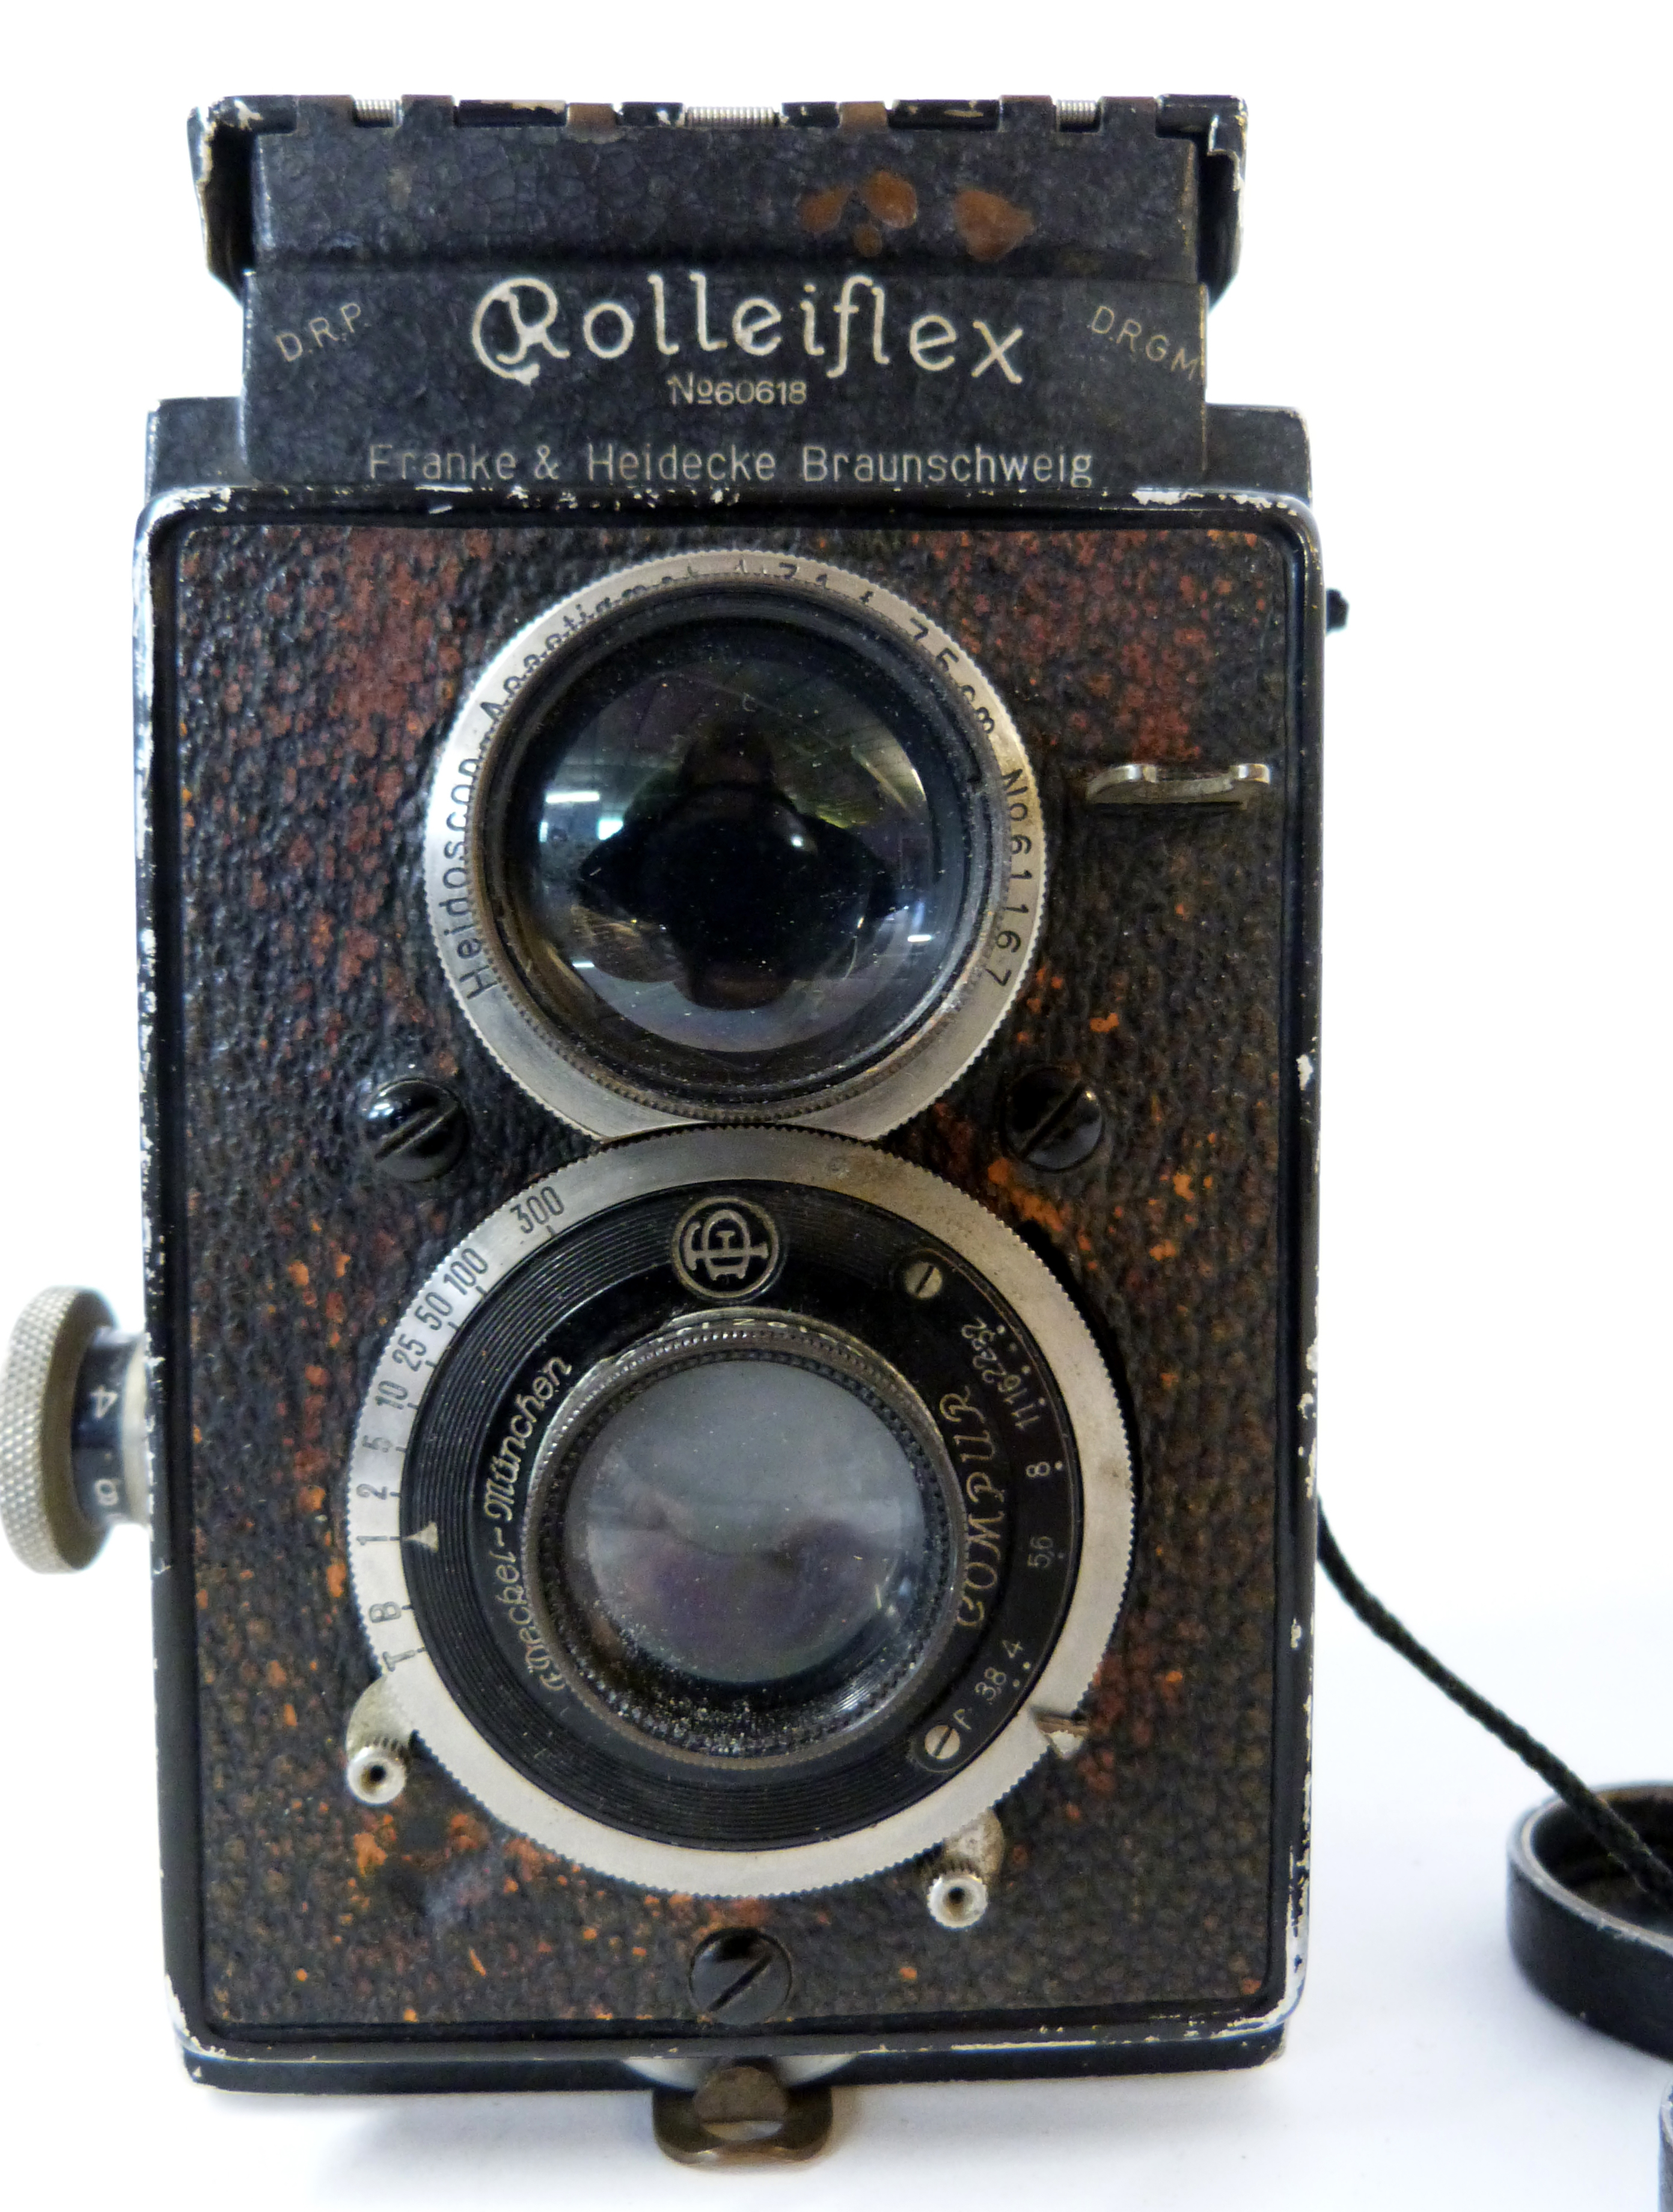 Very early Rolleiflex camera 60618 - Image 4 of 5